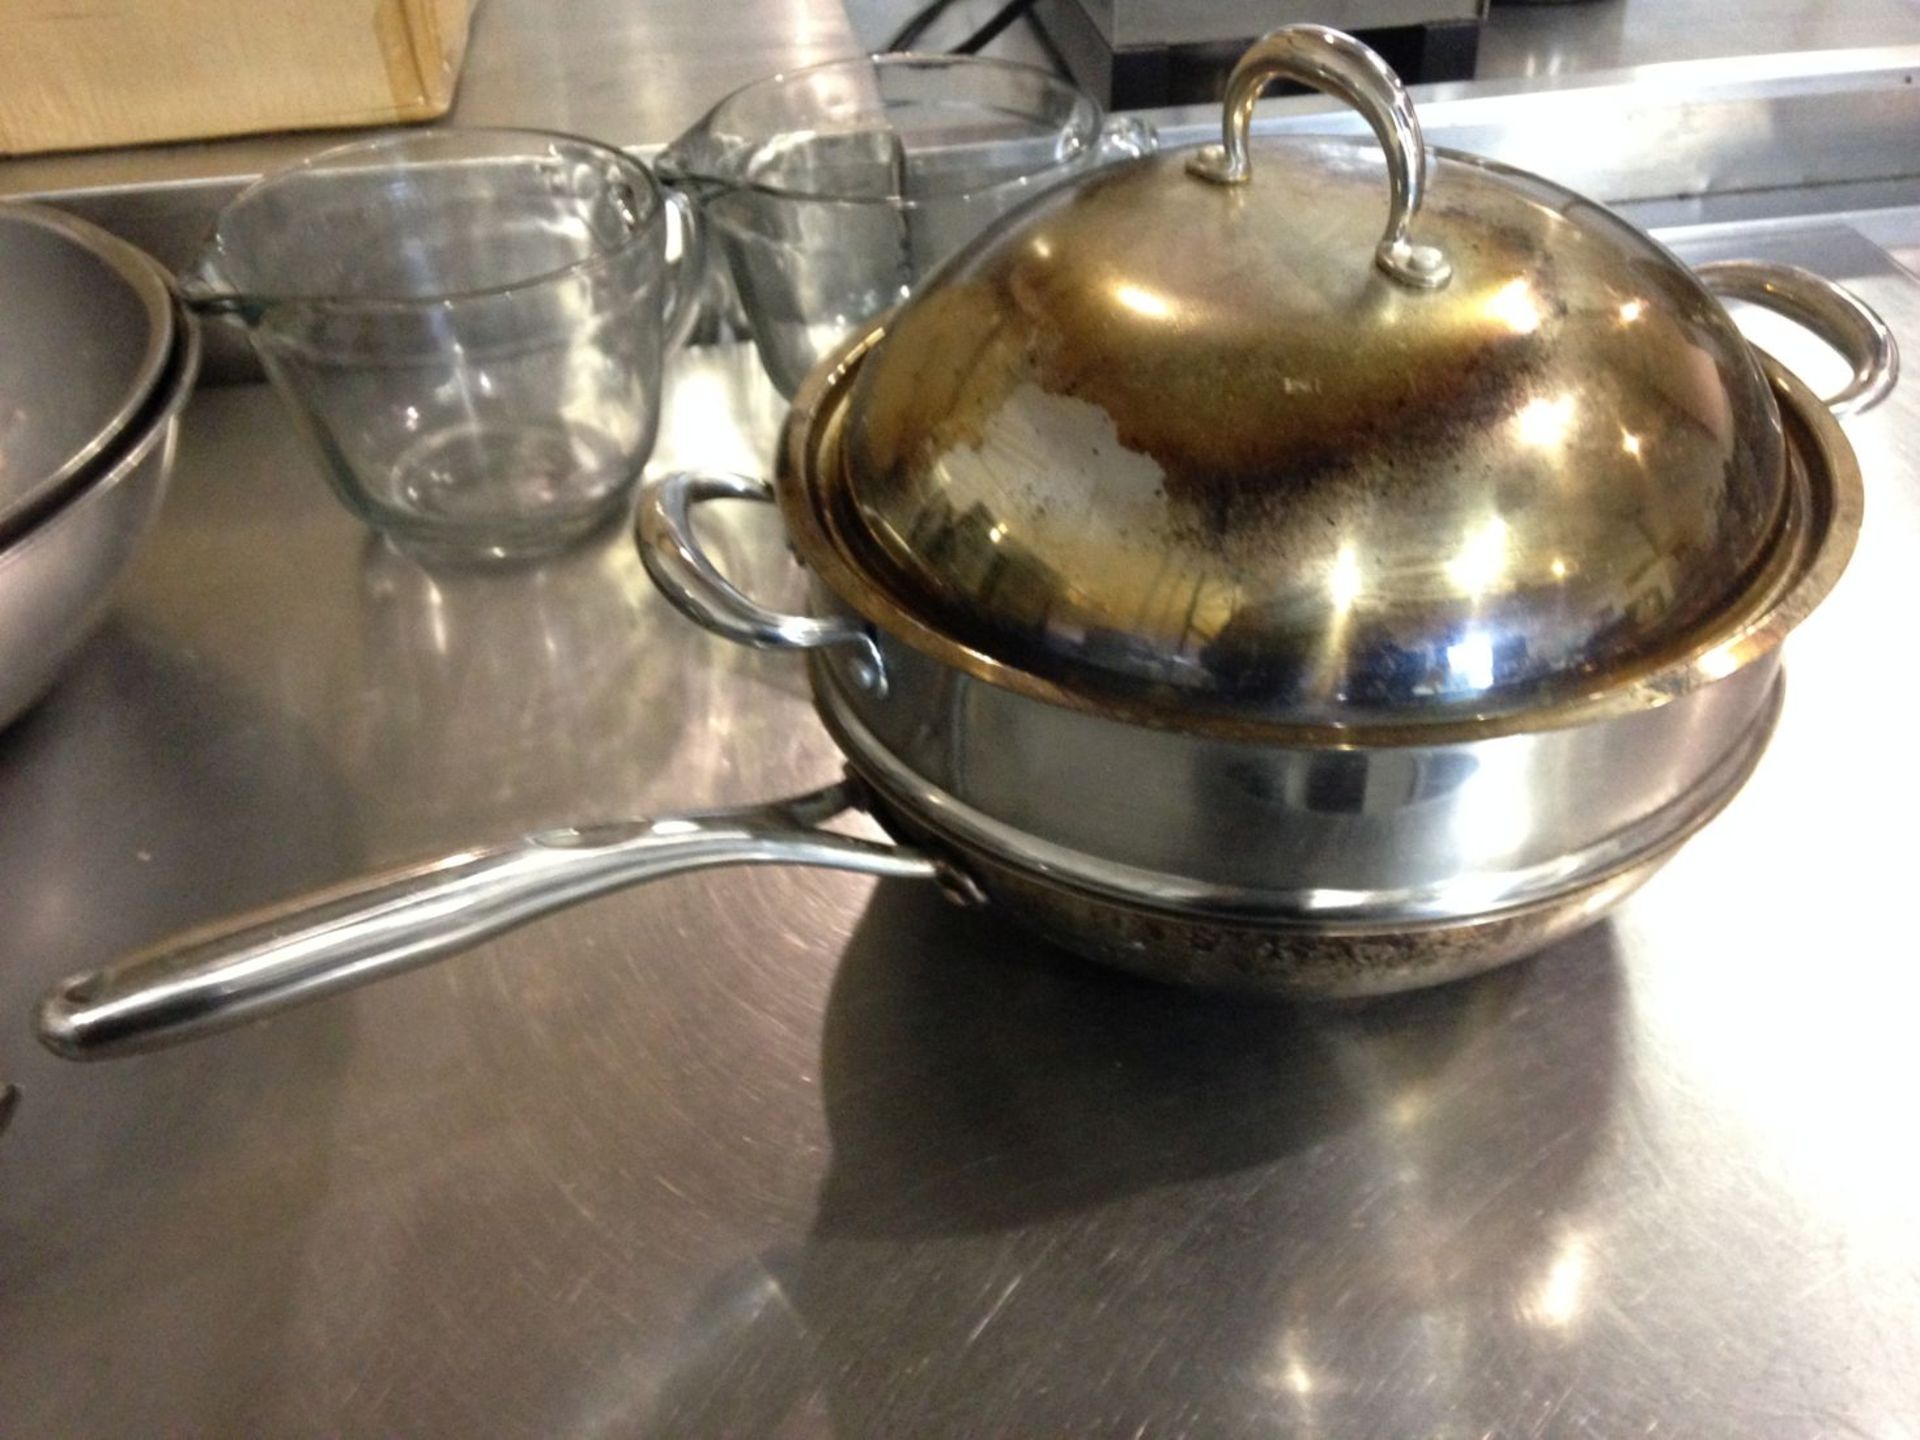 Stainless Pan with Steamer Insert